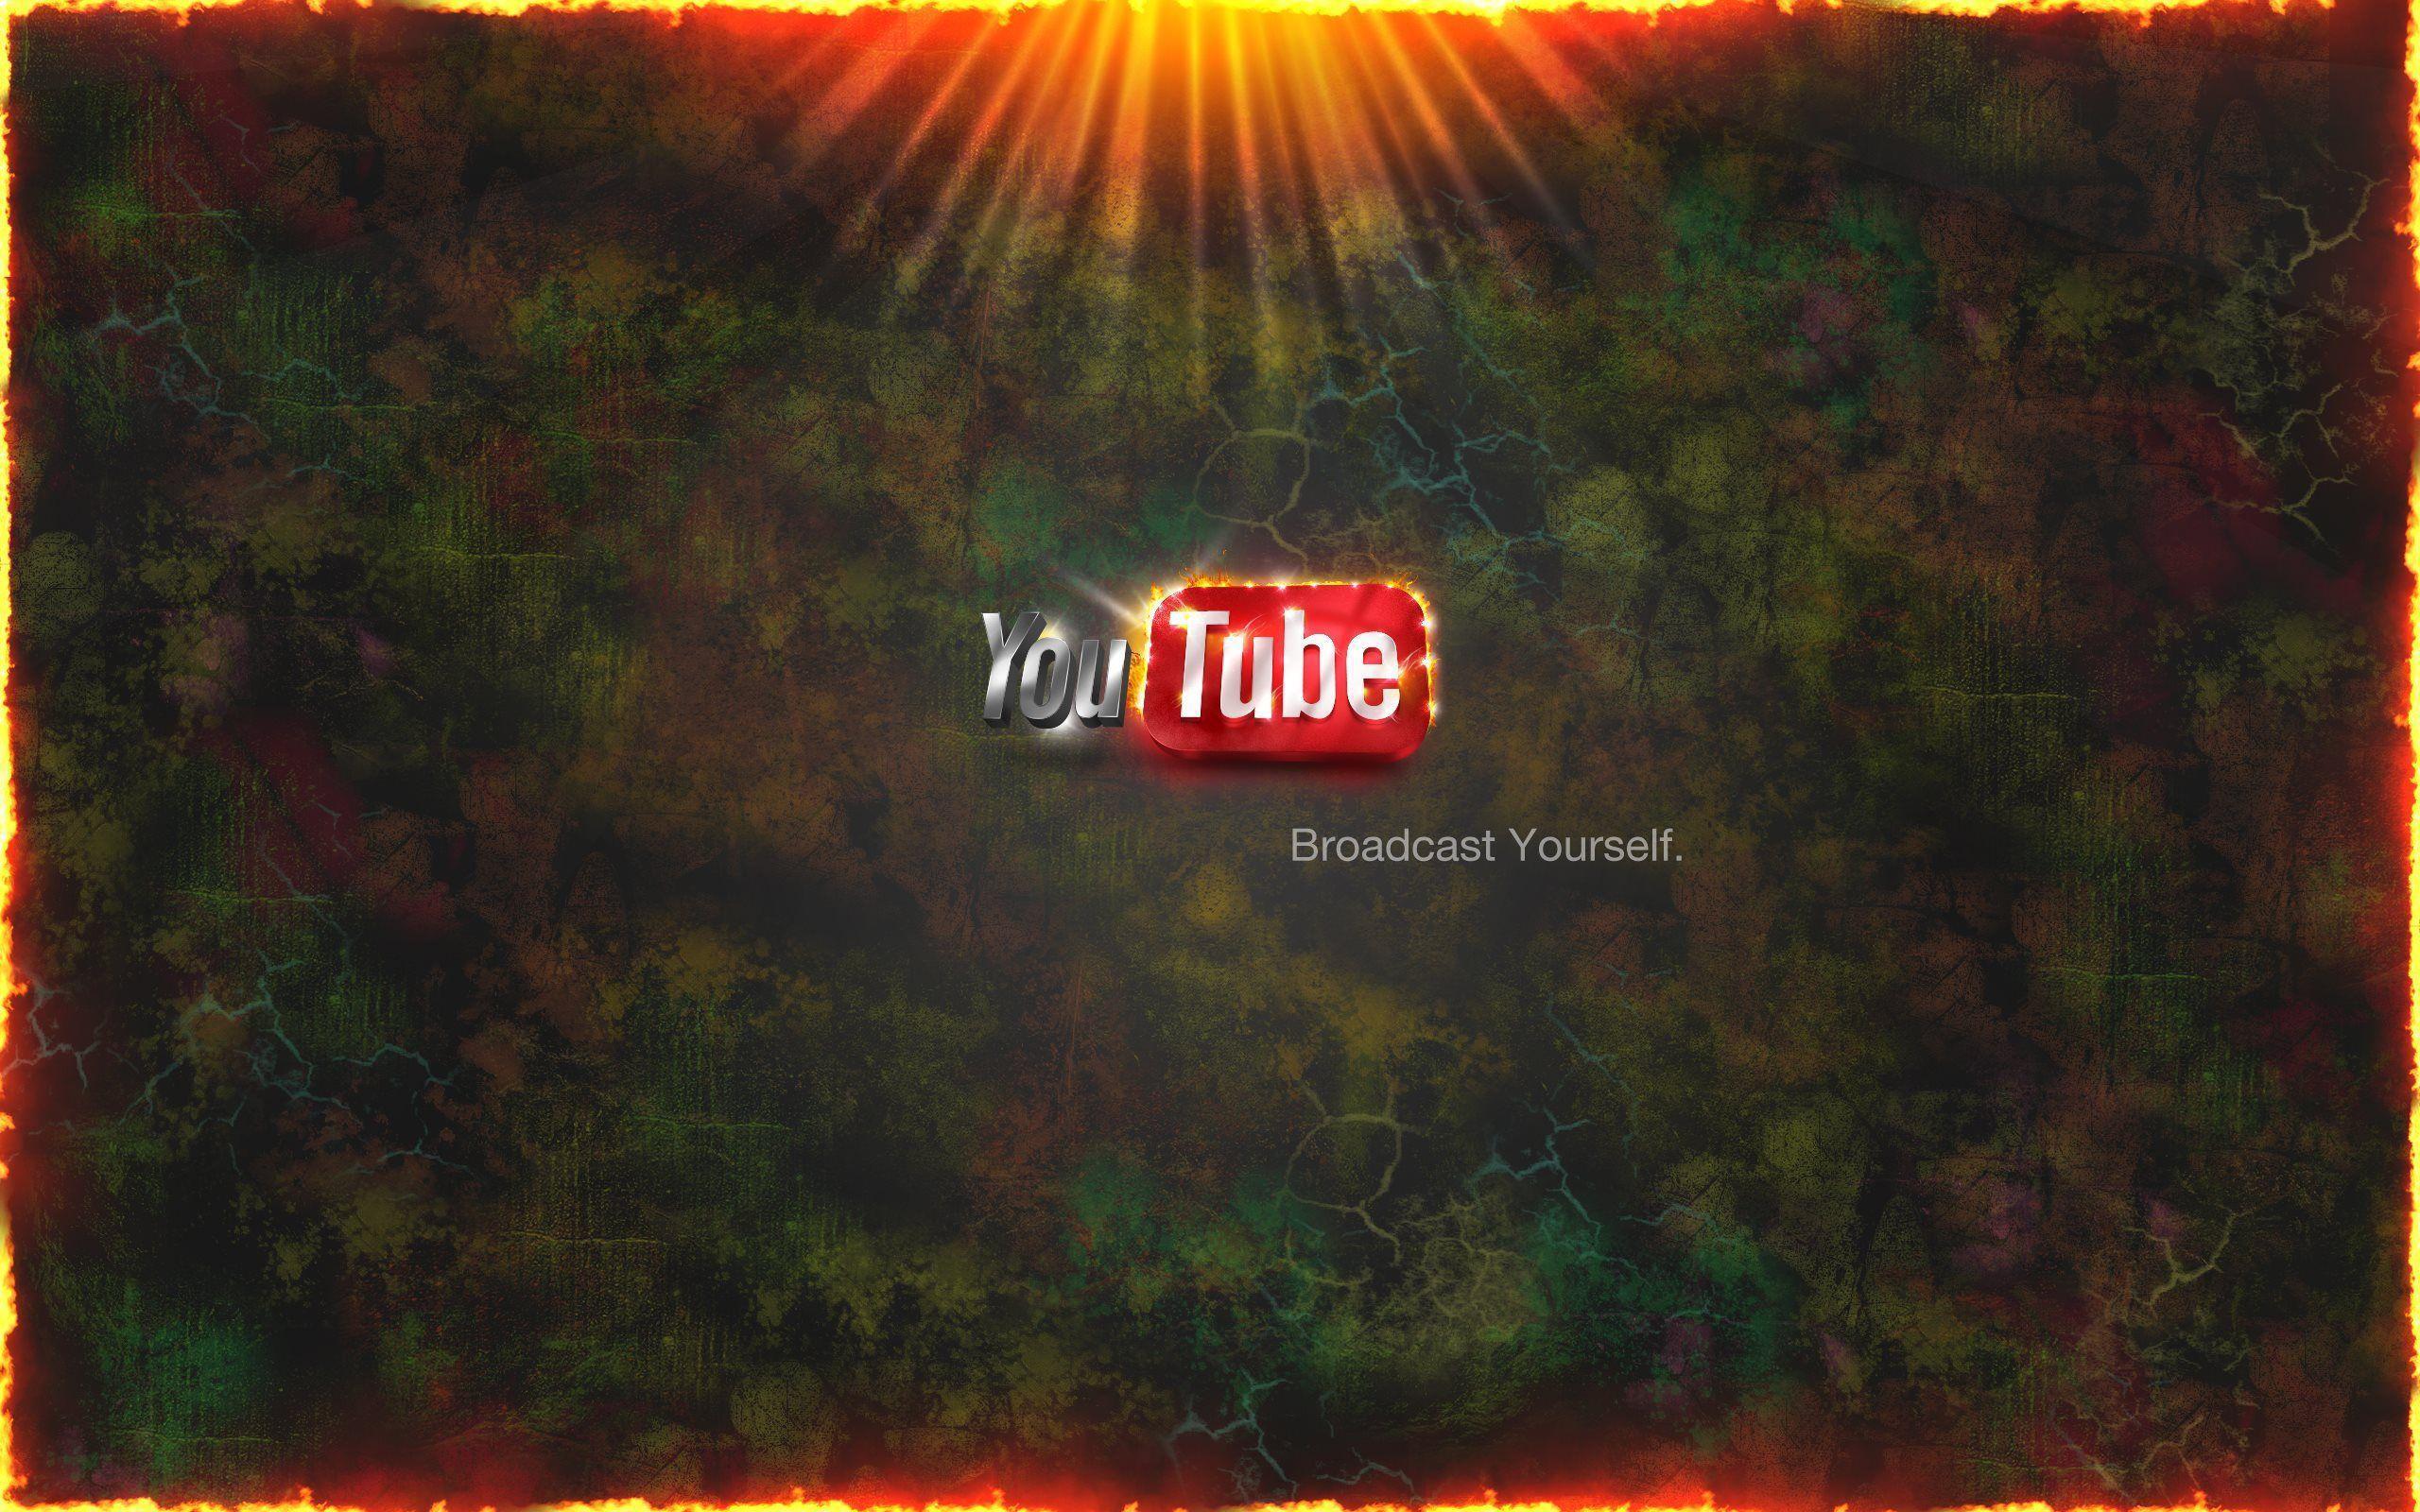 Youtube Backgrounds Free Download